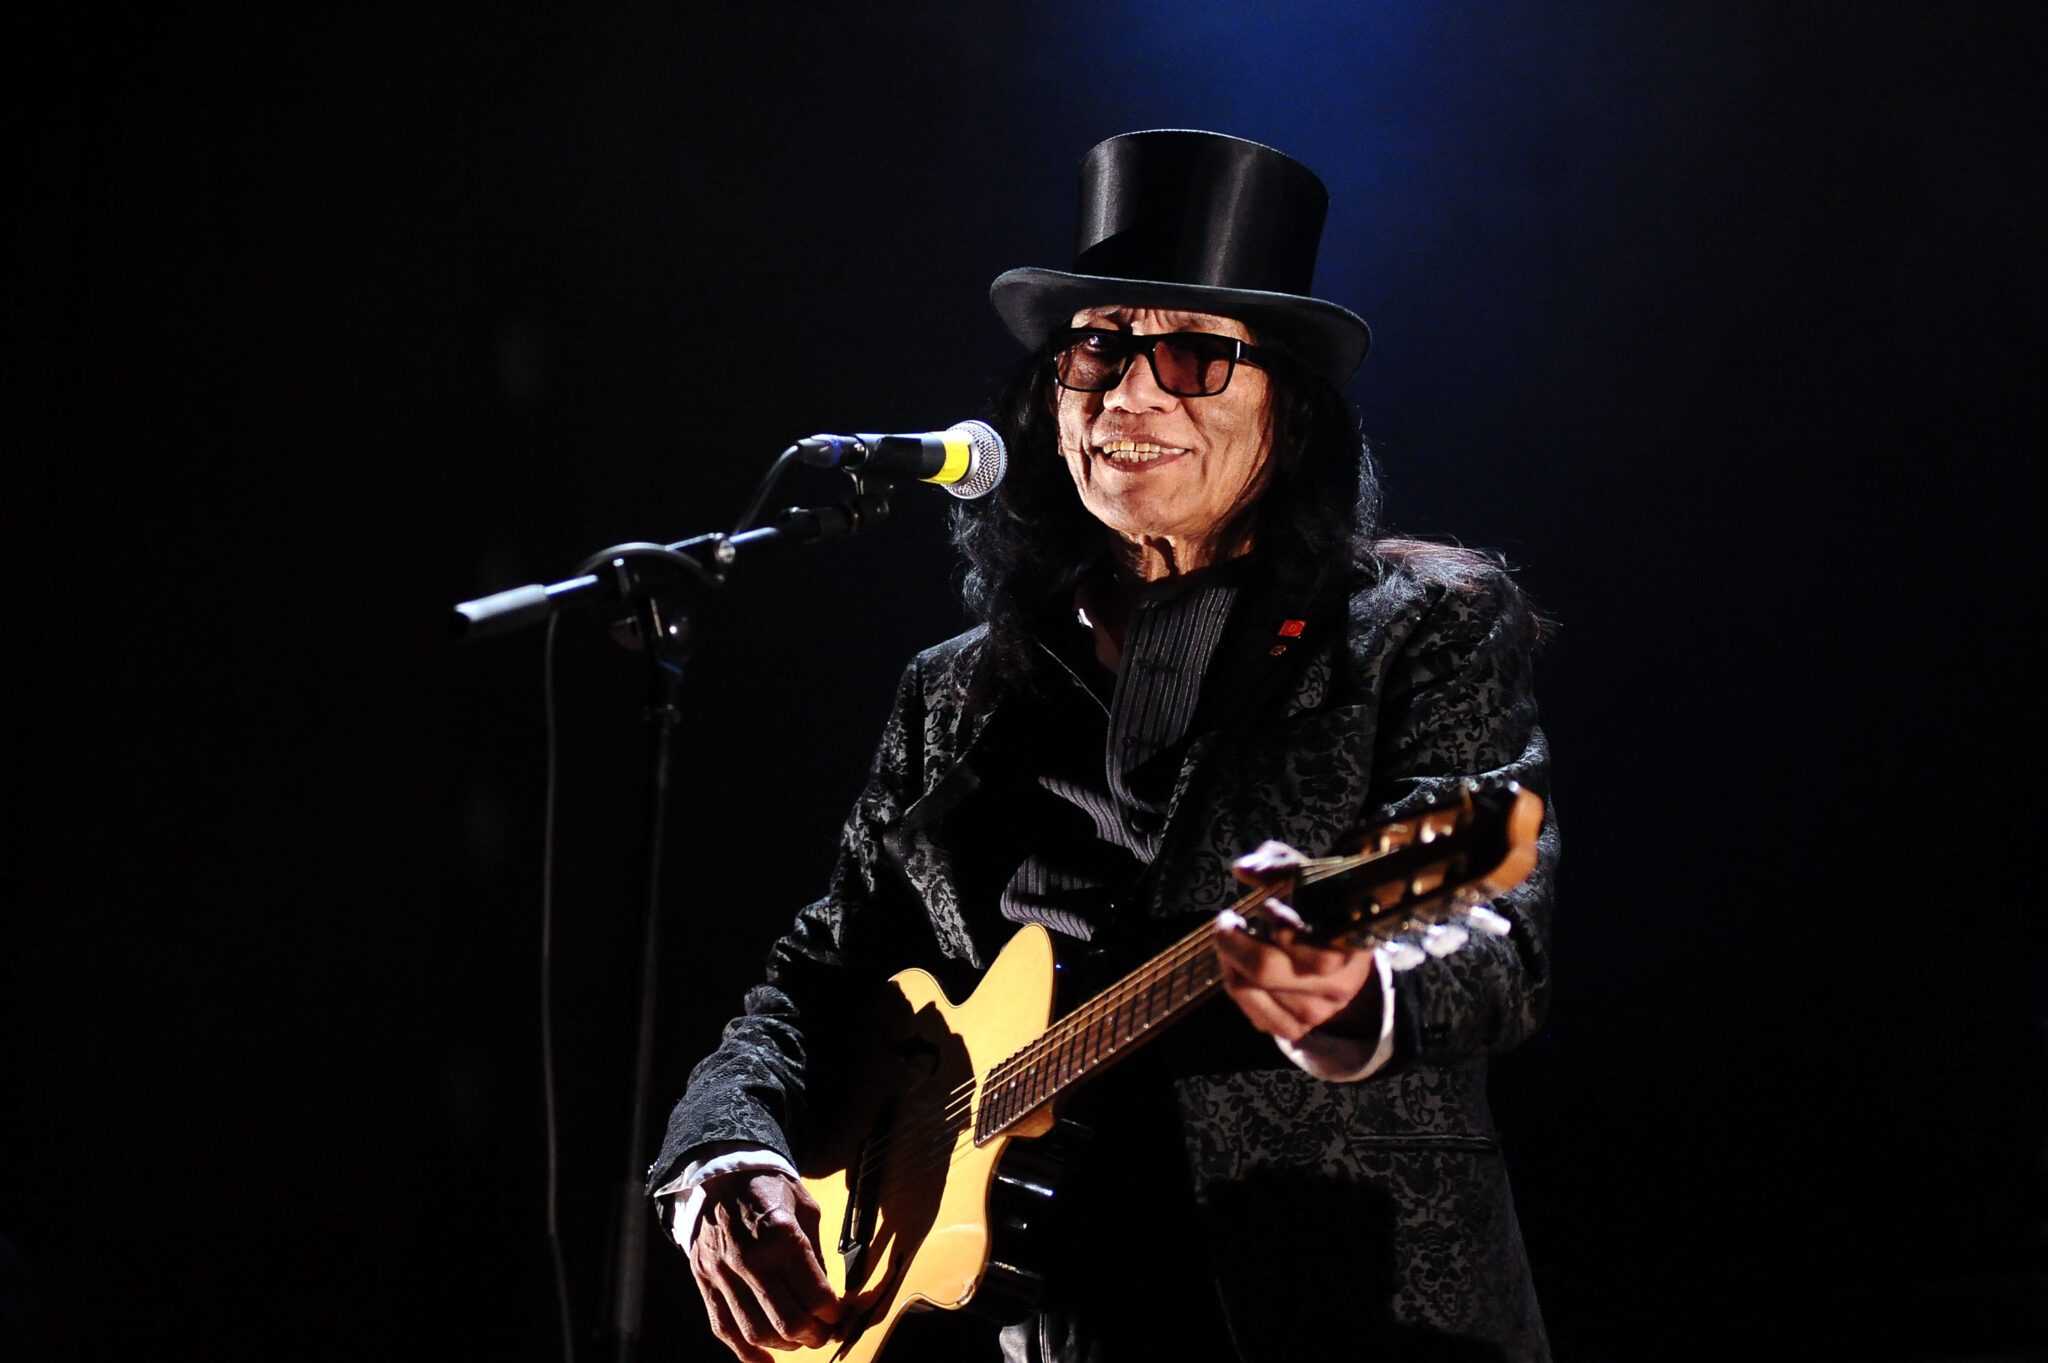 A musician in a black outfit and top hat playing an electric guitar and singing into a microphone on stage under a spotlight.